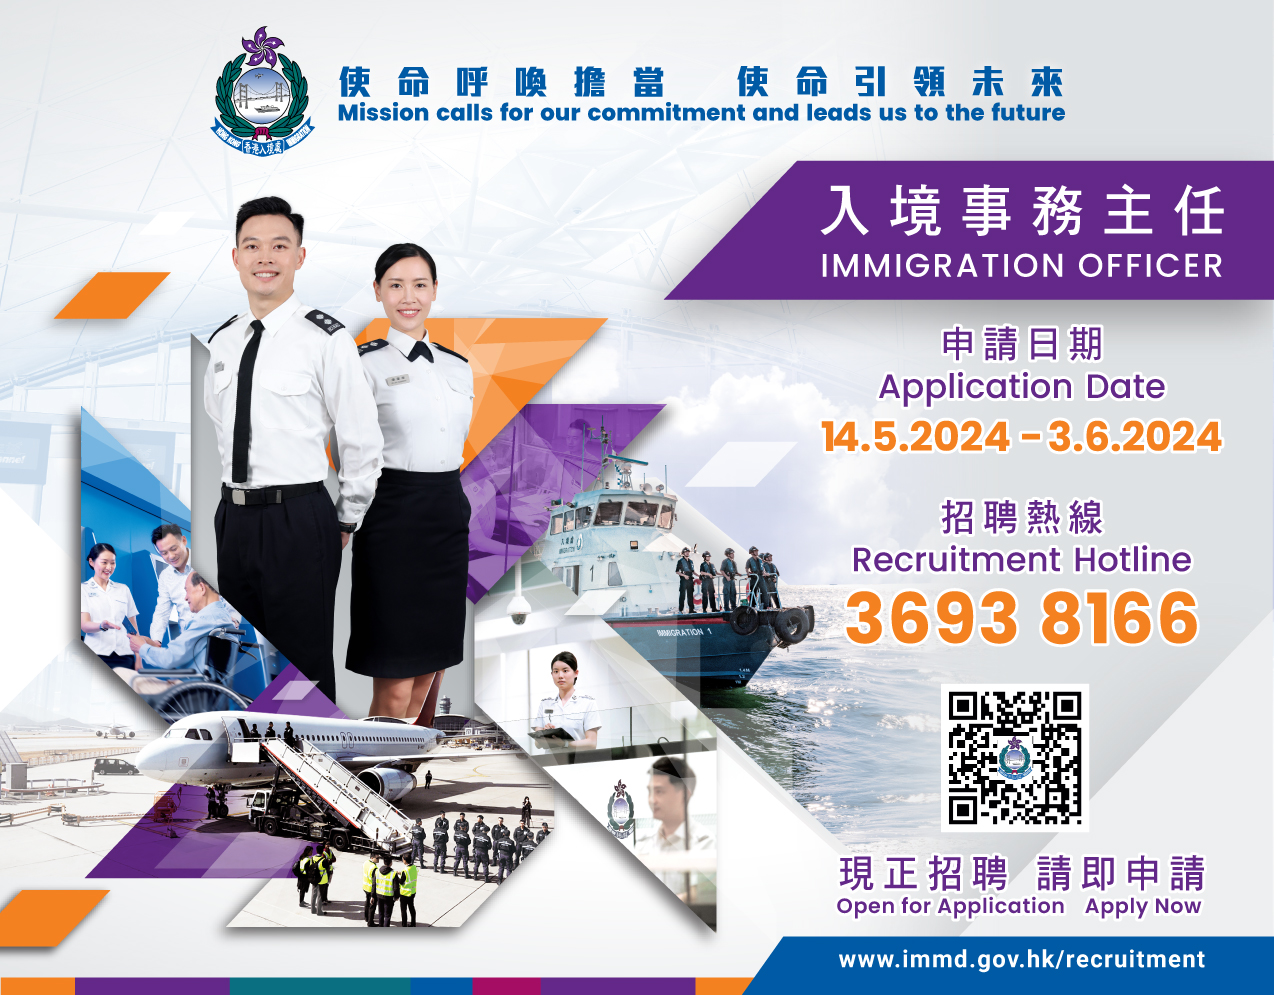 Open for Application for Immigration Officer